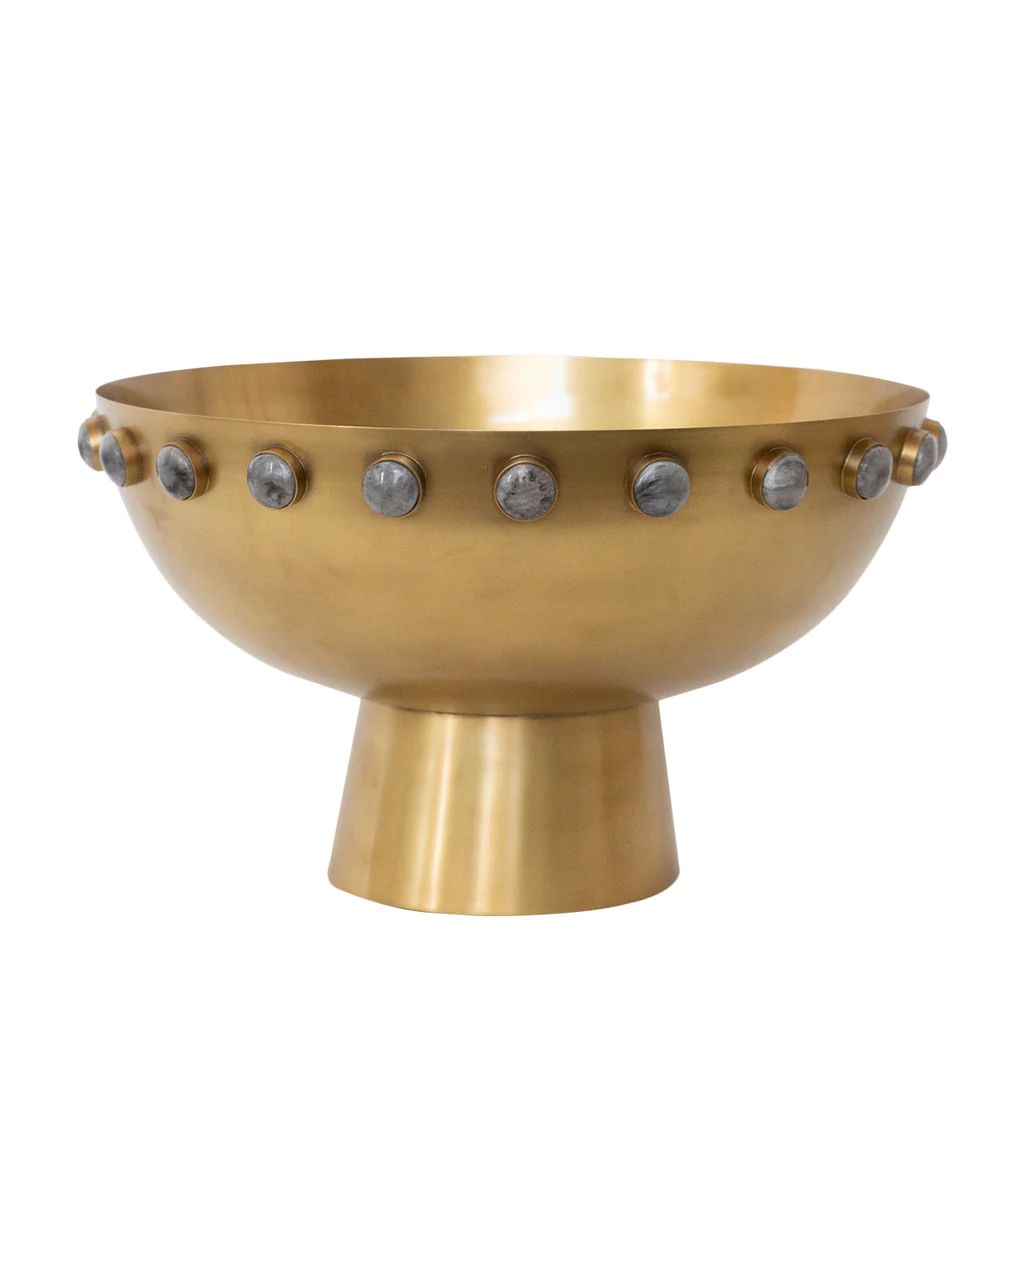 Stone & Brass Bowl | McGee & Co.